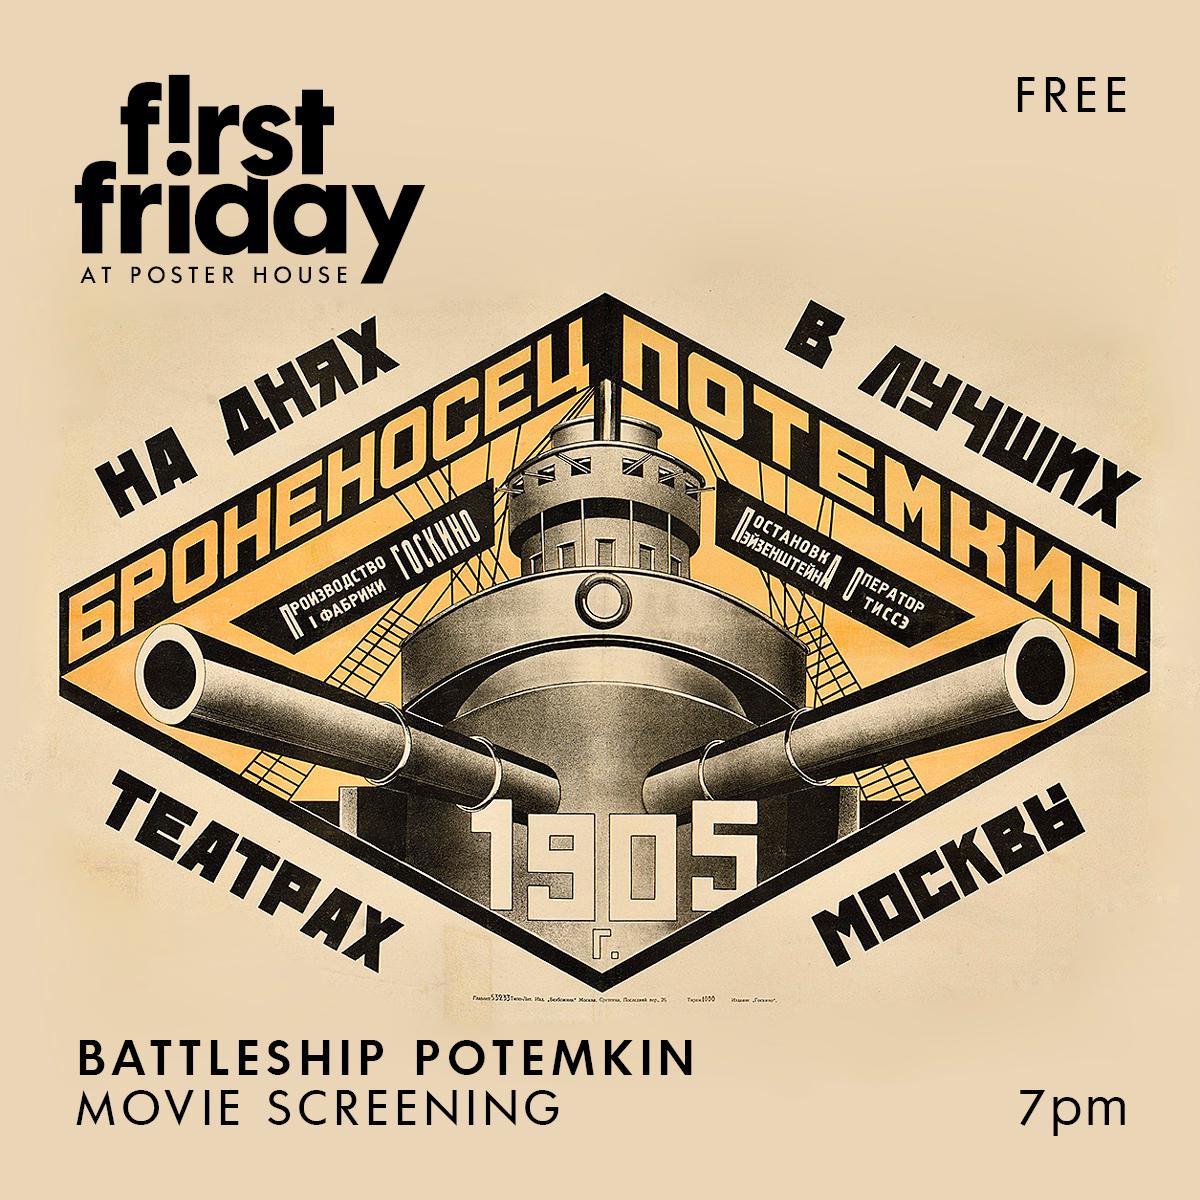 First Friday promotion featuring a cropped poster of The Battleship Potemkin, an illustrated ship with Cyrillic text. Text reads First Friday at Poster House free Battleship Potemkin movie screening 7pm.